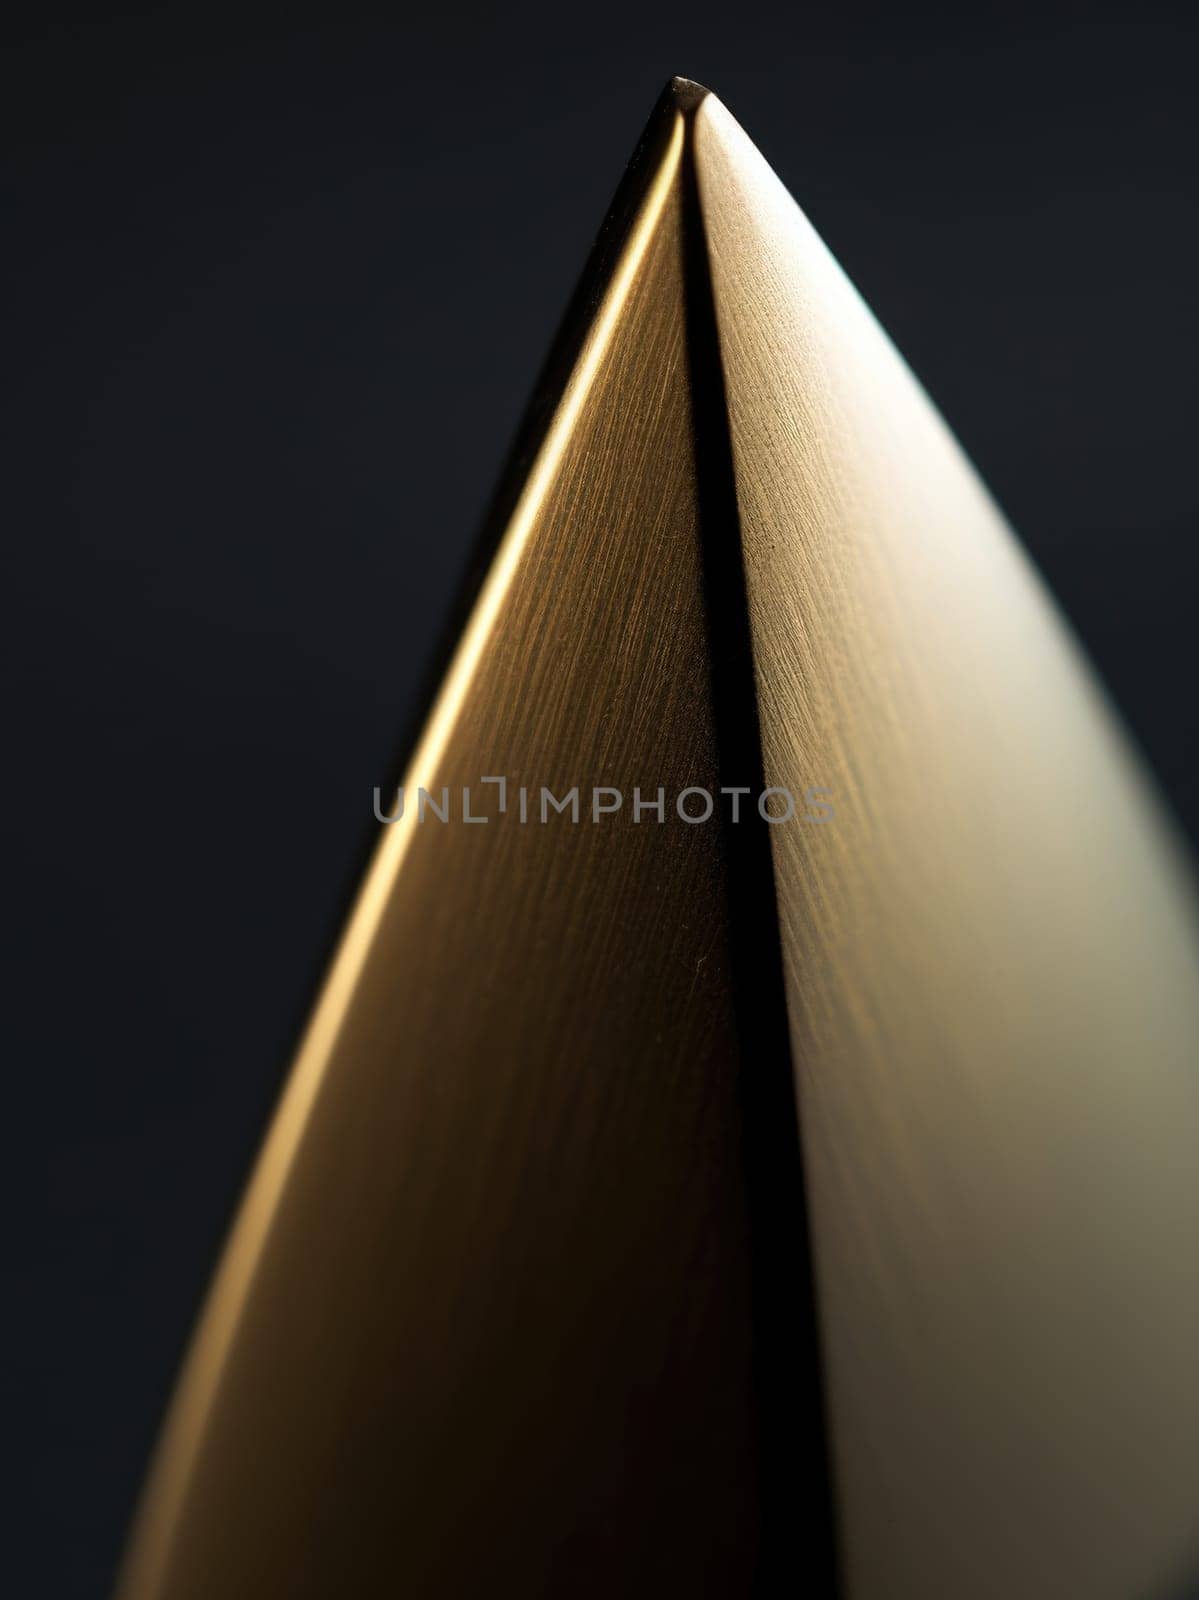 A golden triangle with a black background